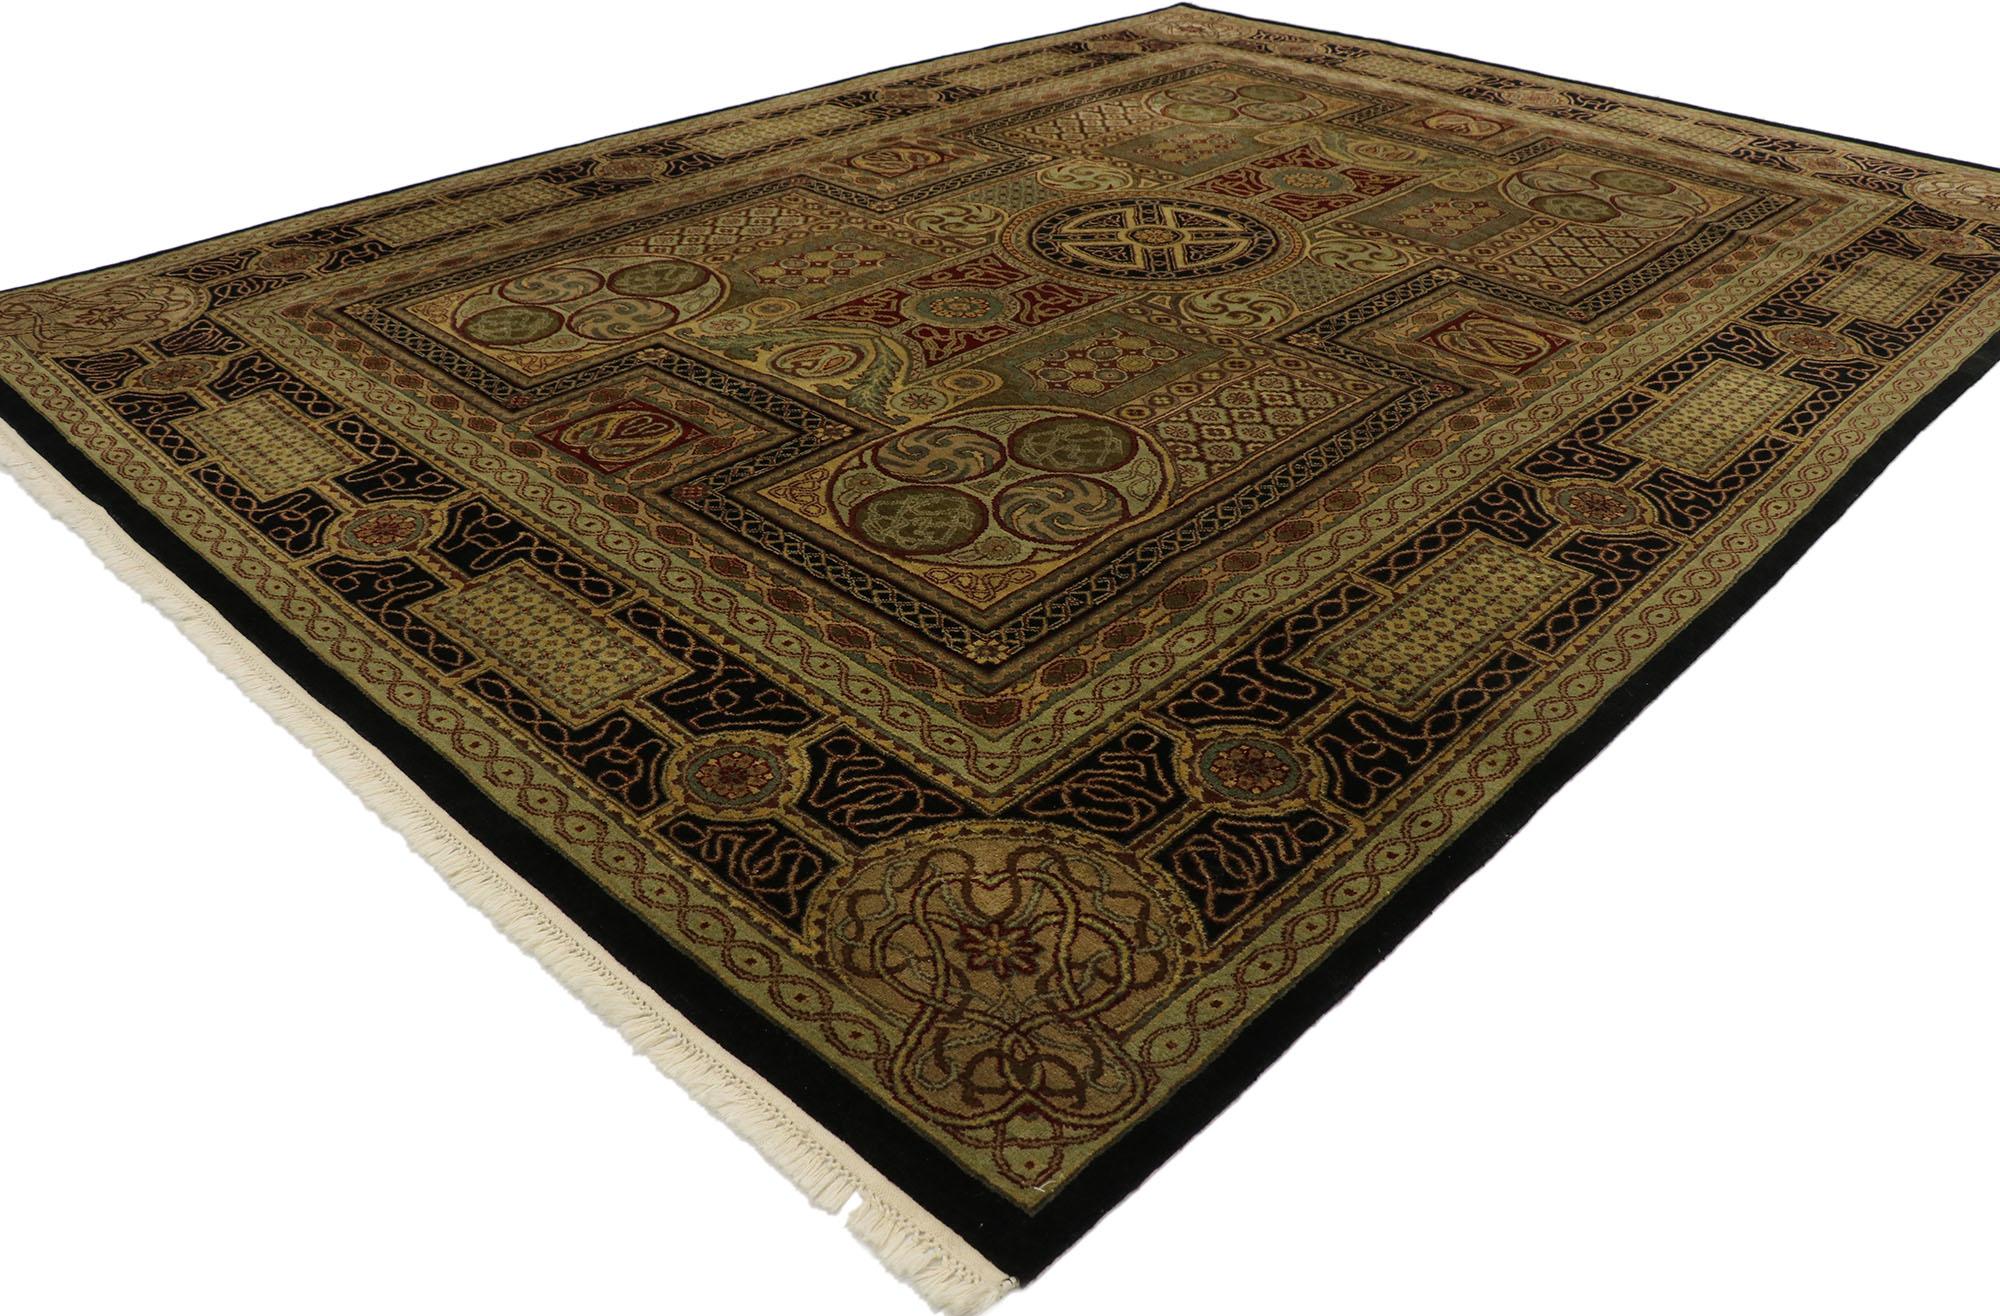 77553 Vintage Indian rug with Regal Baroque style. With timeless design, ornate decorative detailing, and regal beauty, this hand knotted wool vintage Indian rug is poised to impress. The field is covered in a well-balanced all-over compartmental